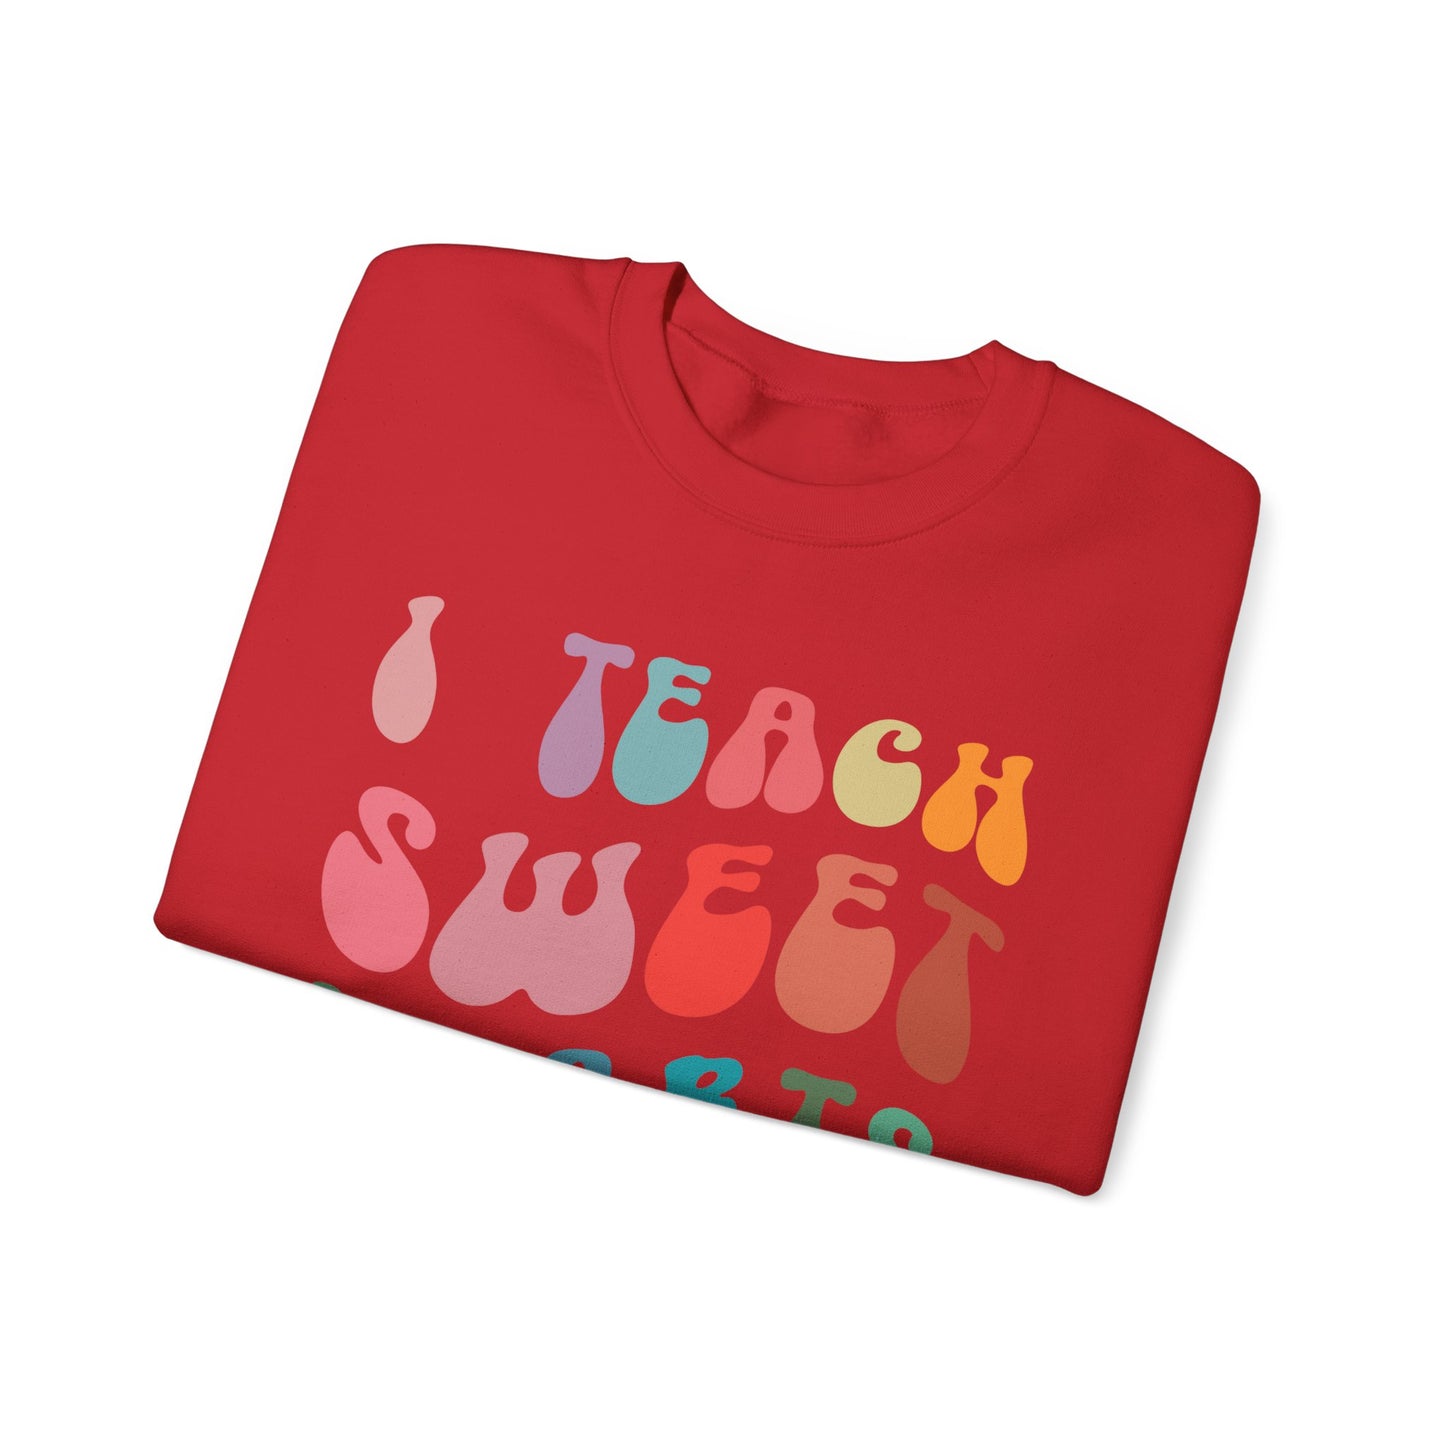 Personalized Teach Sweethearts Valentines Day Sweatshirt, Custom Teacher Valentines Day Sweatshirt for Teachers, Gift for Hearts Day, SW1276